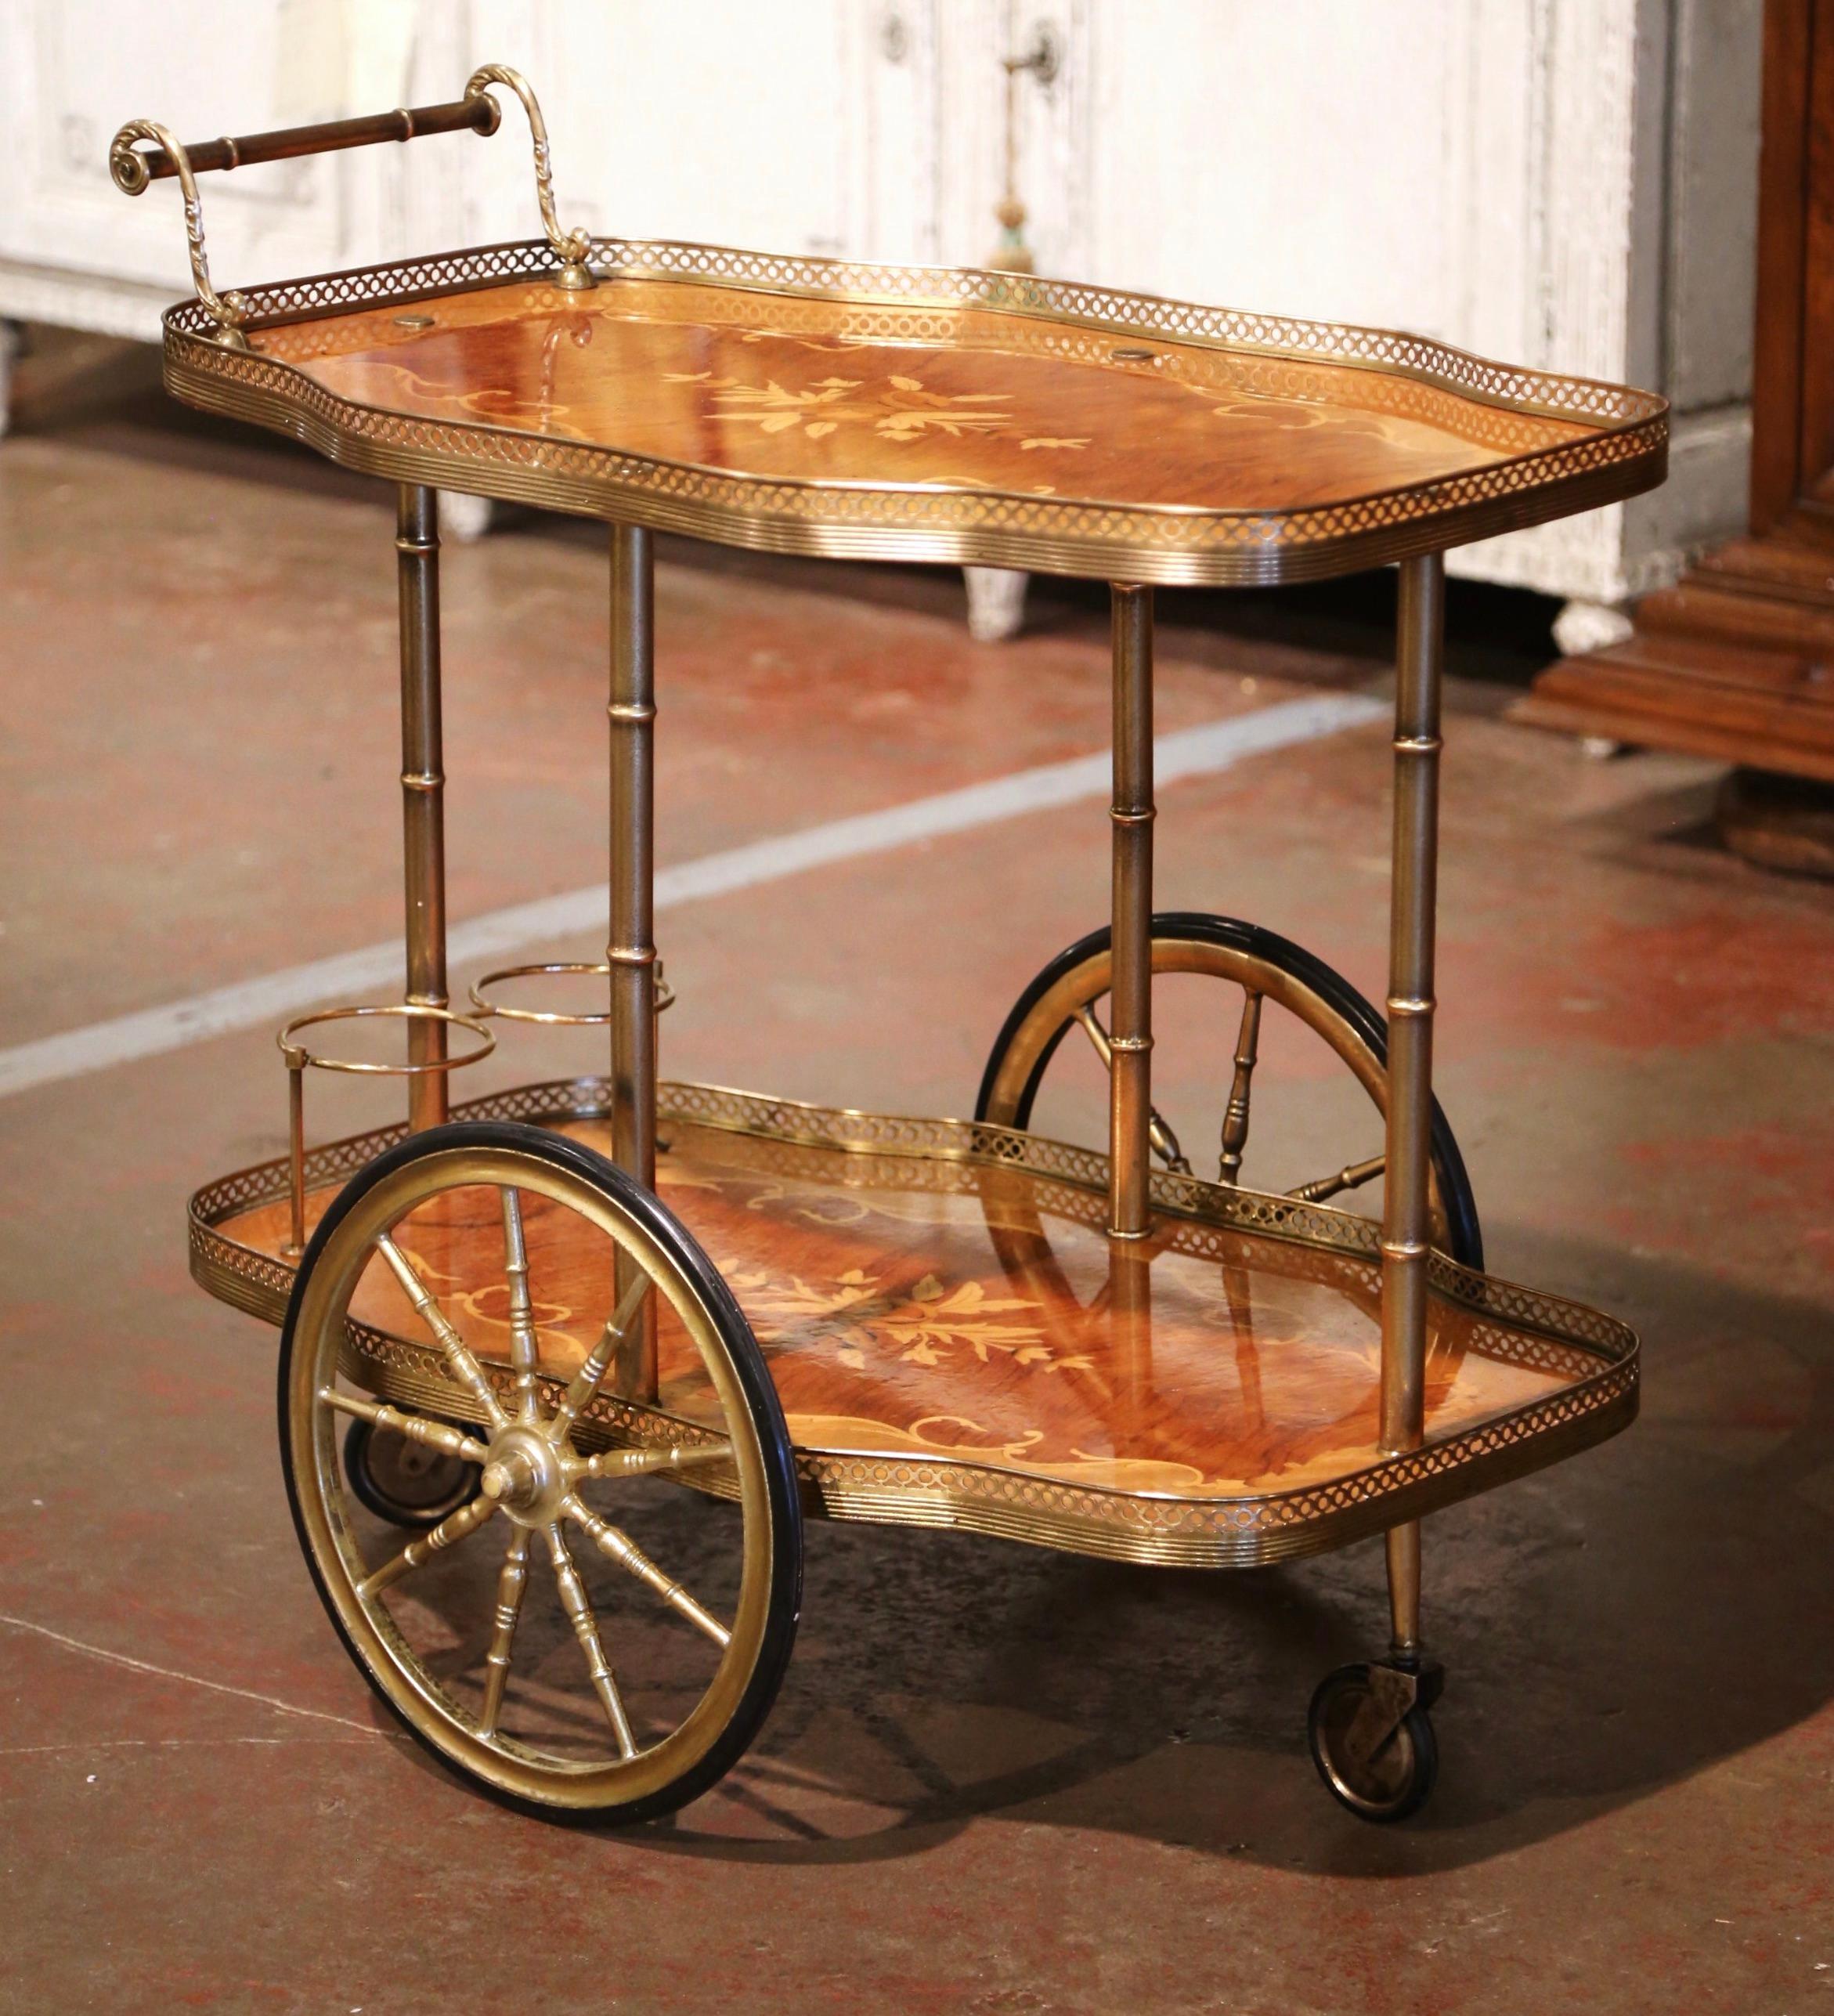 This elegant two-tier wooden and brass cart was created in France, circa 1950. Scalloped in shape, the bar cart sits on side spoke wheels over bamboo shaped legs, and features a decorative handle at one end of the top deck. The two plateaus with